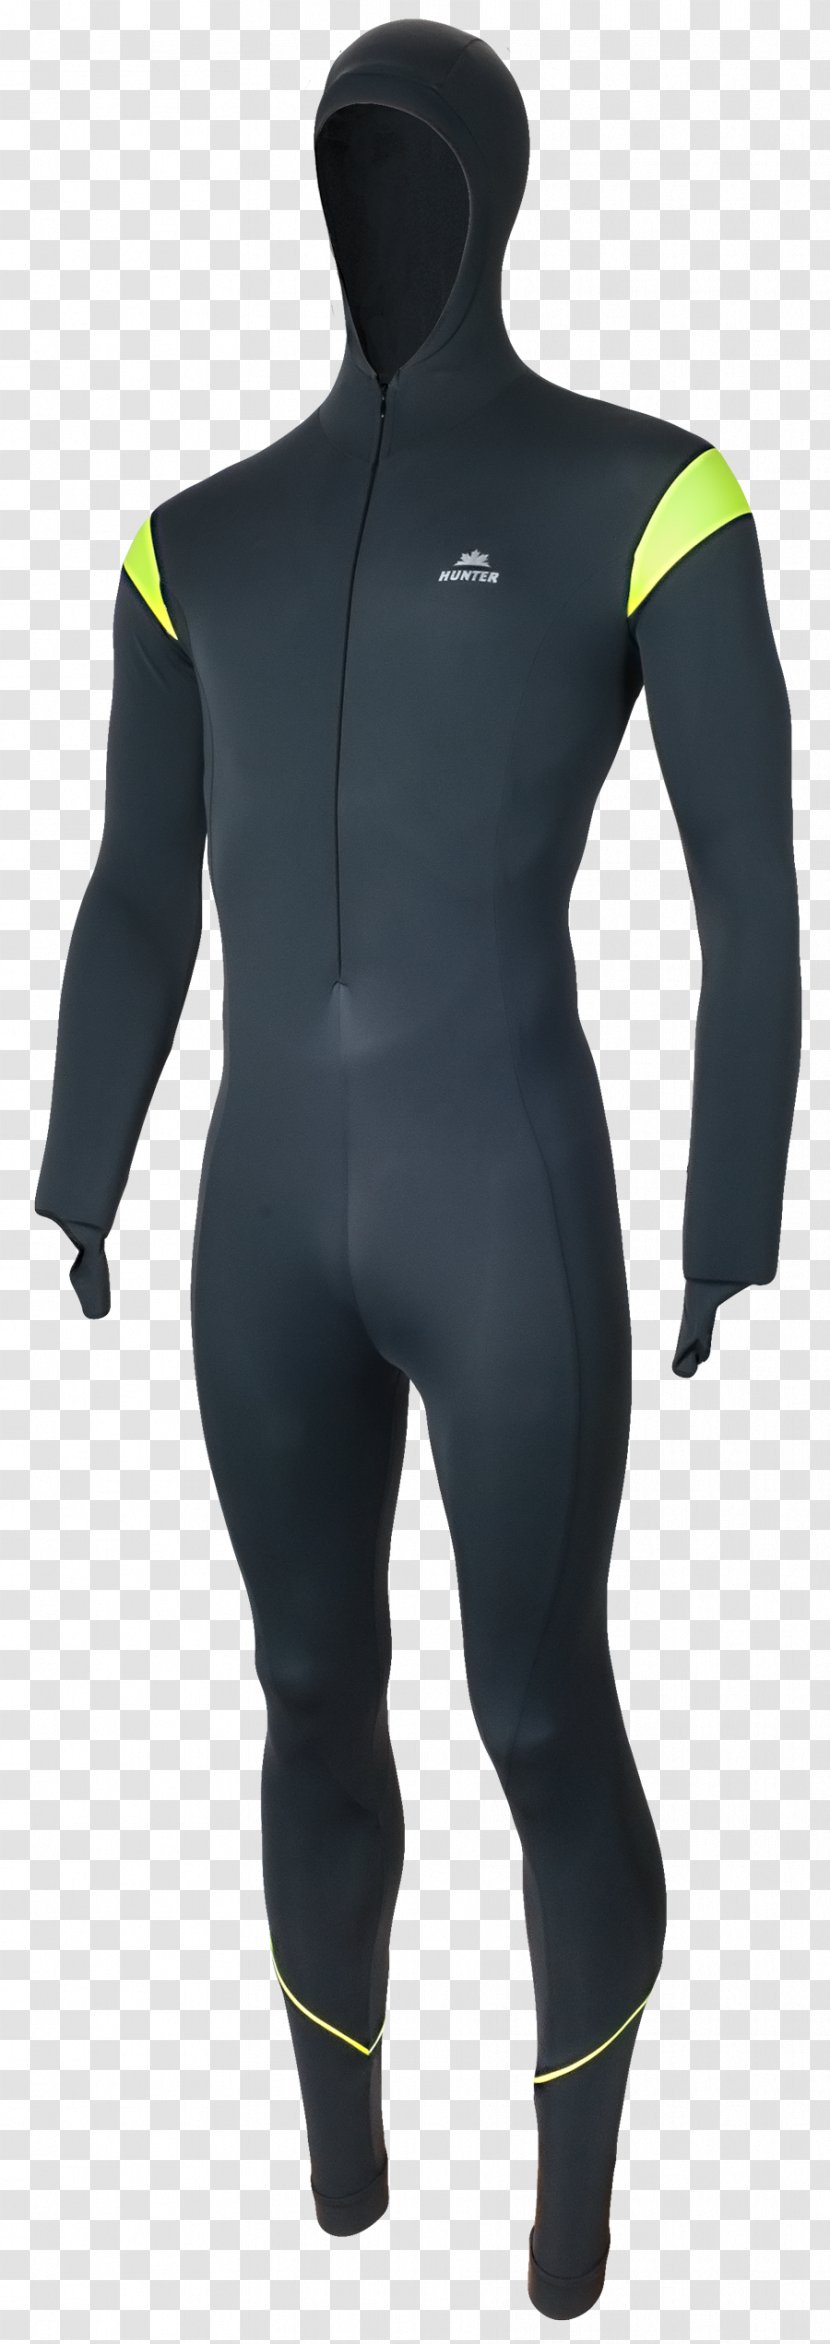 Wetsuit Ice Skating Clothing Sleeve Pants - Raps Bv - Performance Transparent PNG